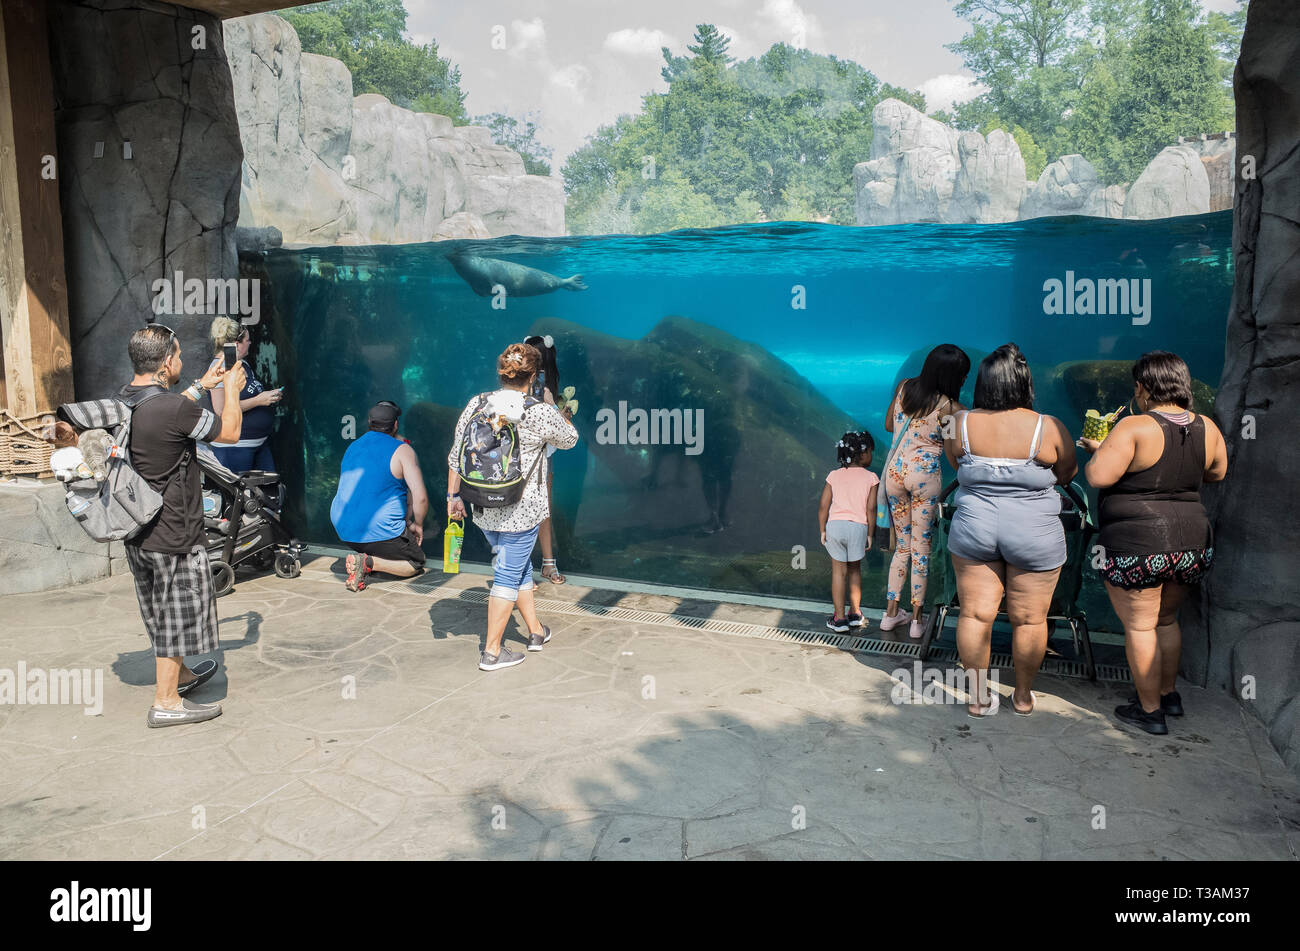 People visiting the St. Louis Zoo in Missouri observe the seals in the ...